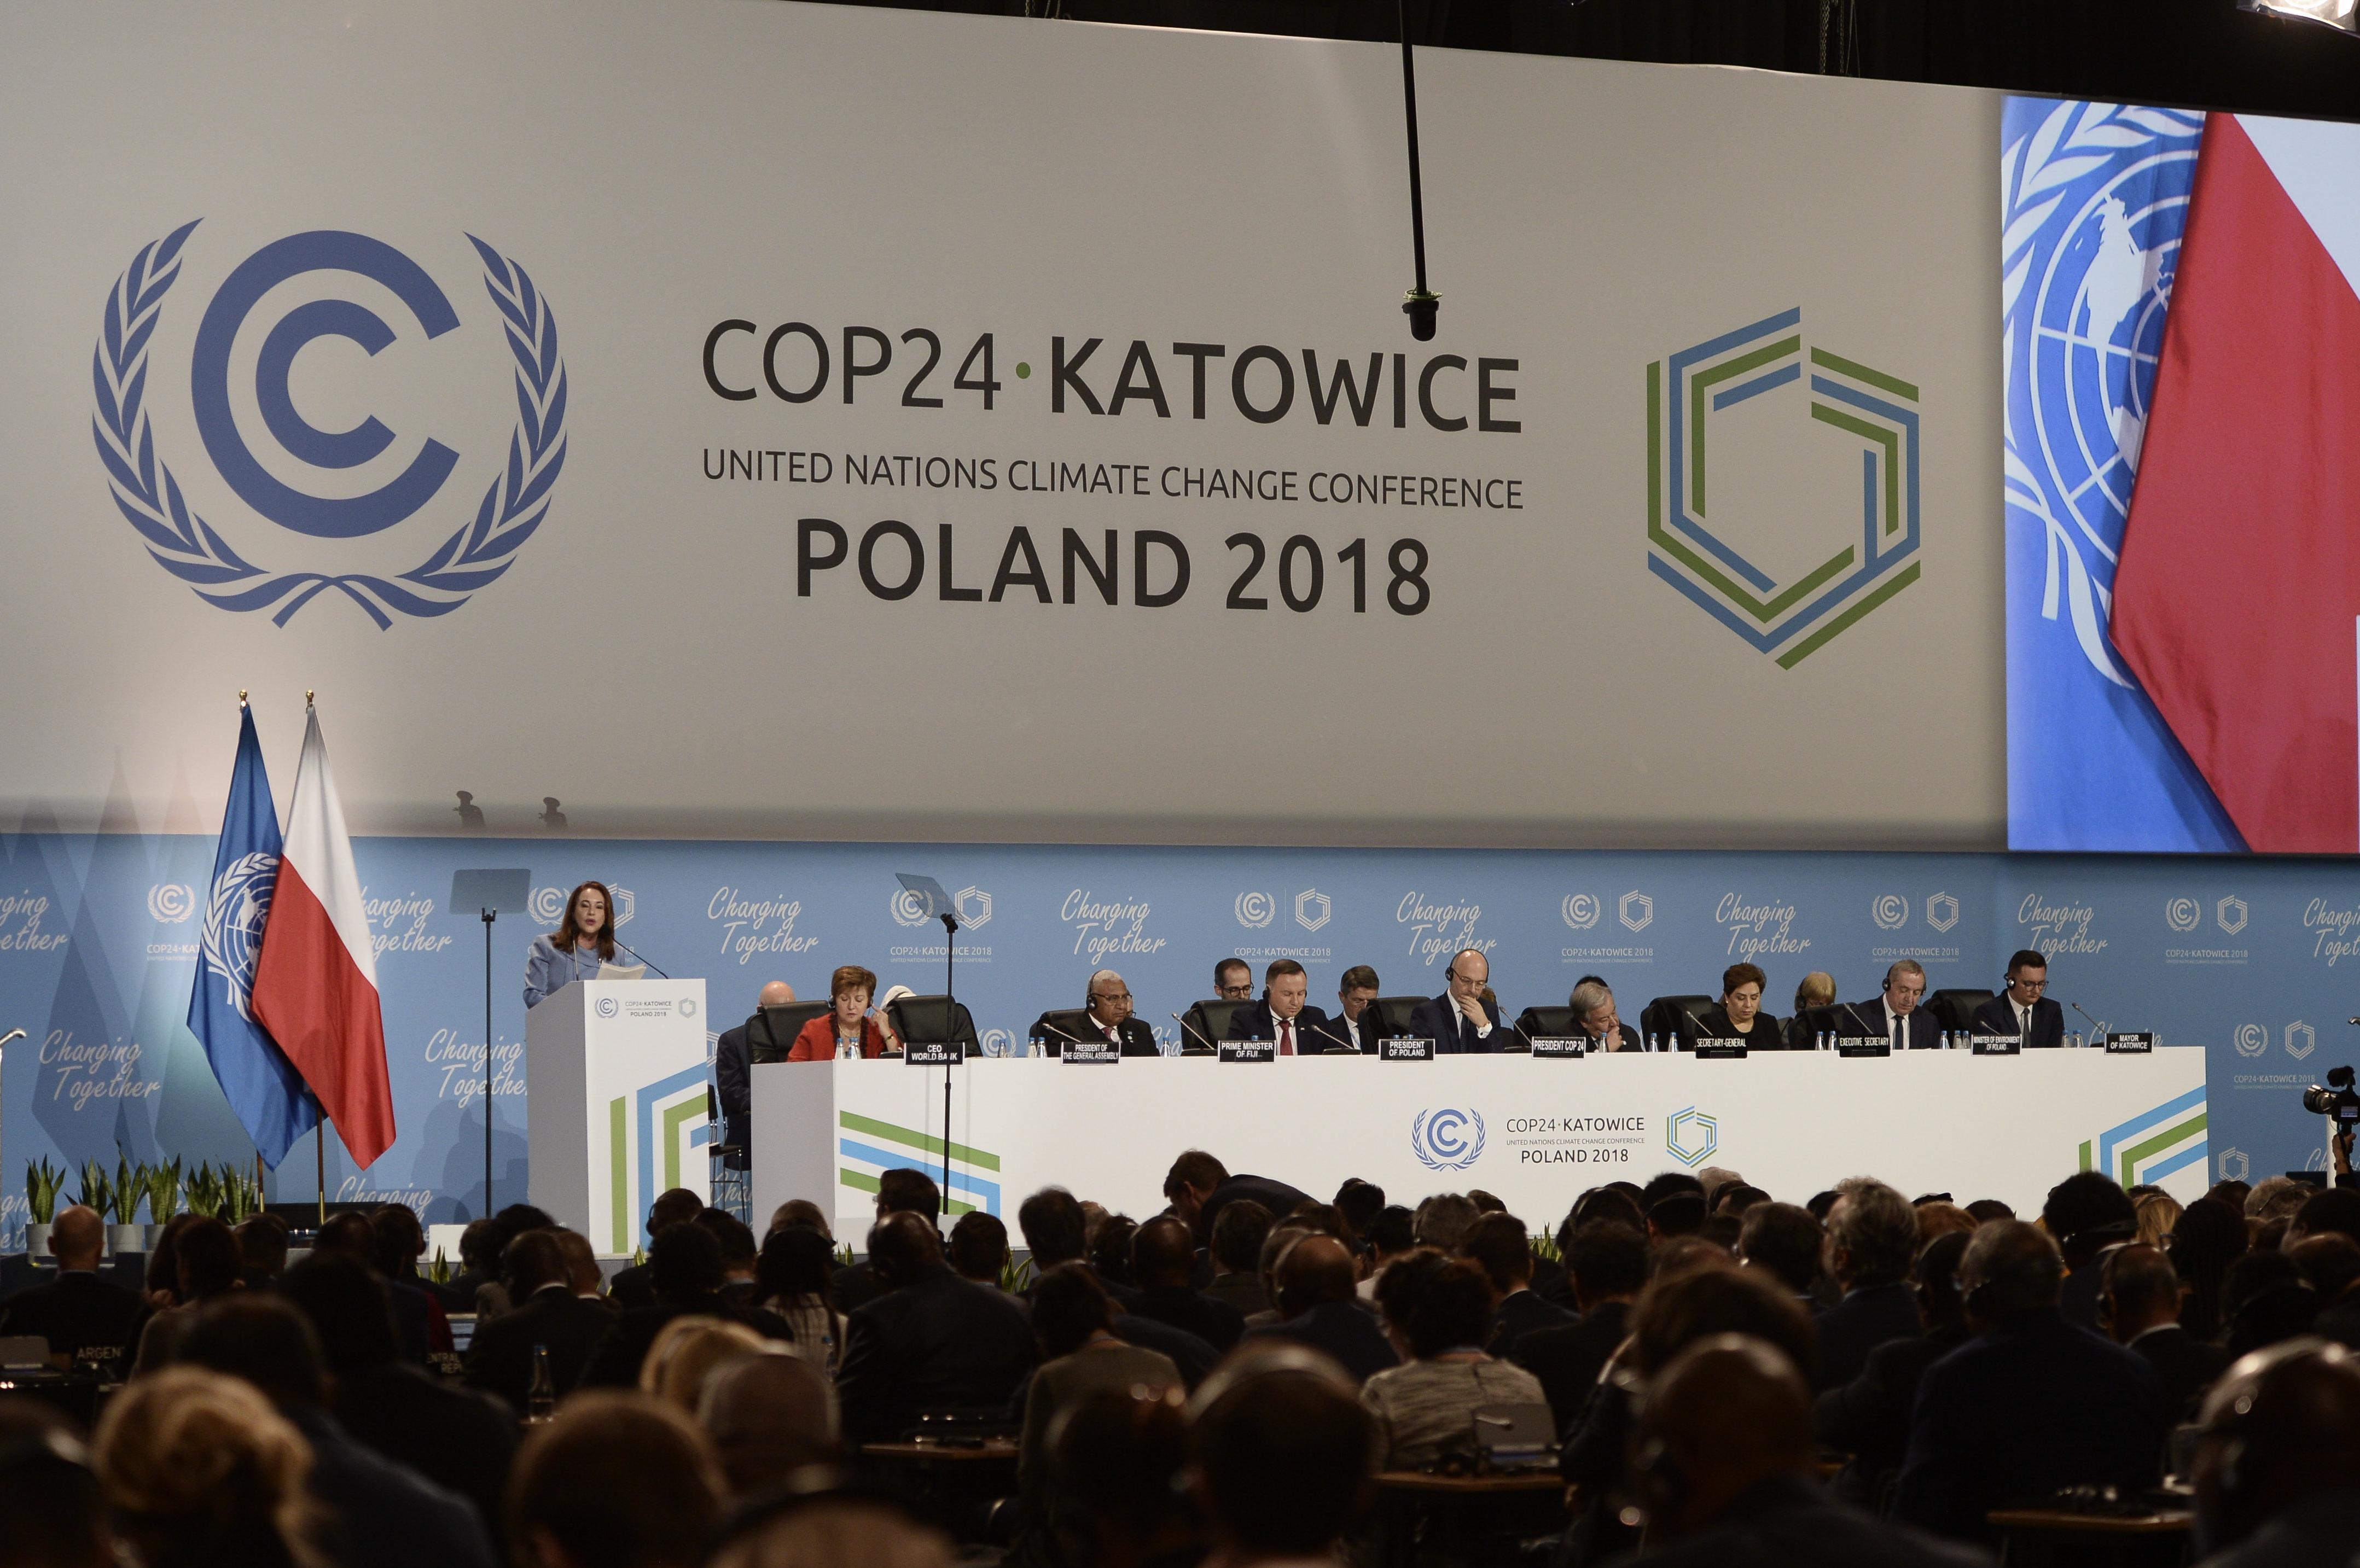 Catholic groups lobby for climate action at COP24